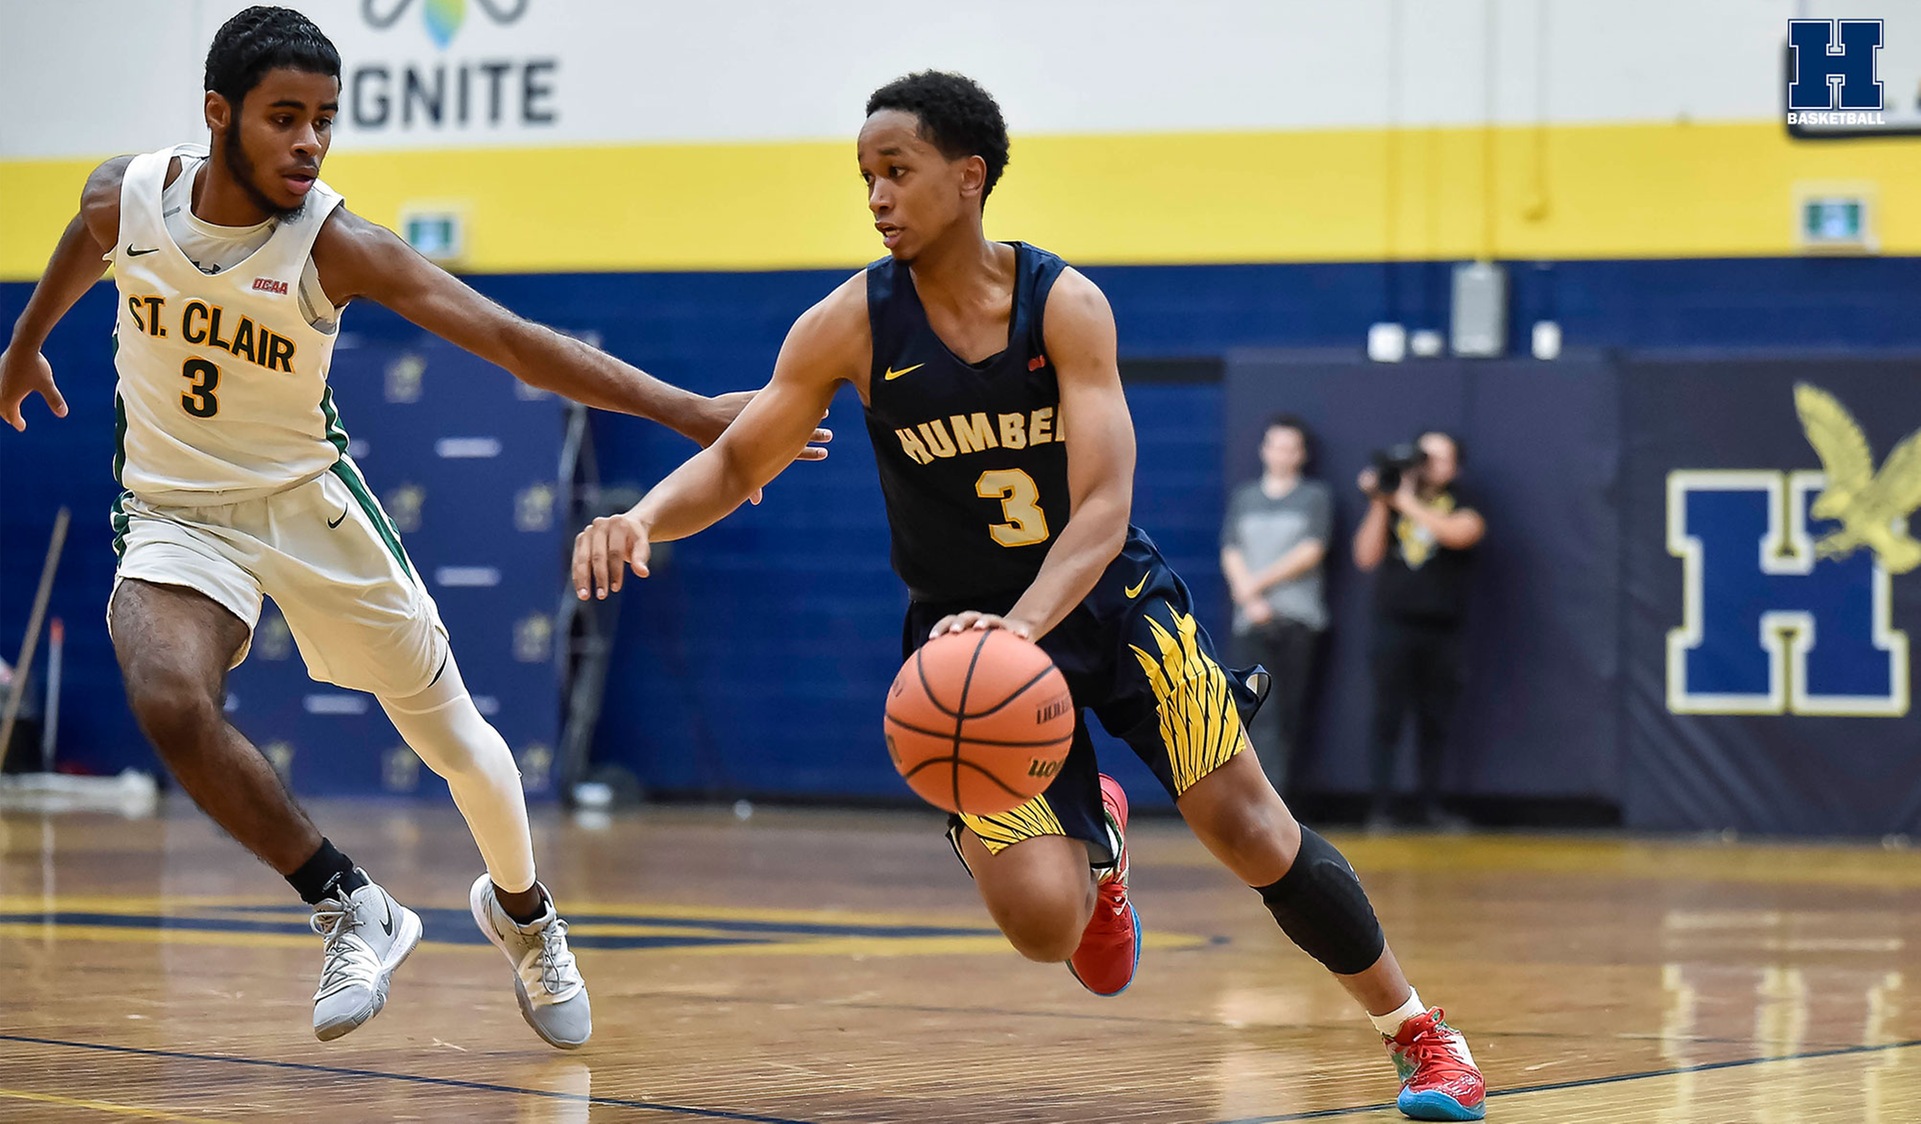 Mohamoud Breaks Another Record as No. 8 Men's Basketball Wins at St. Clair